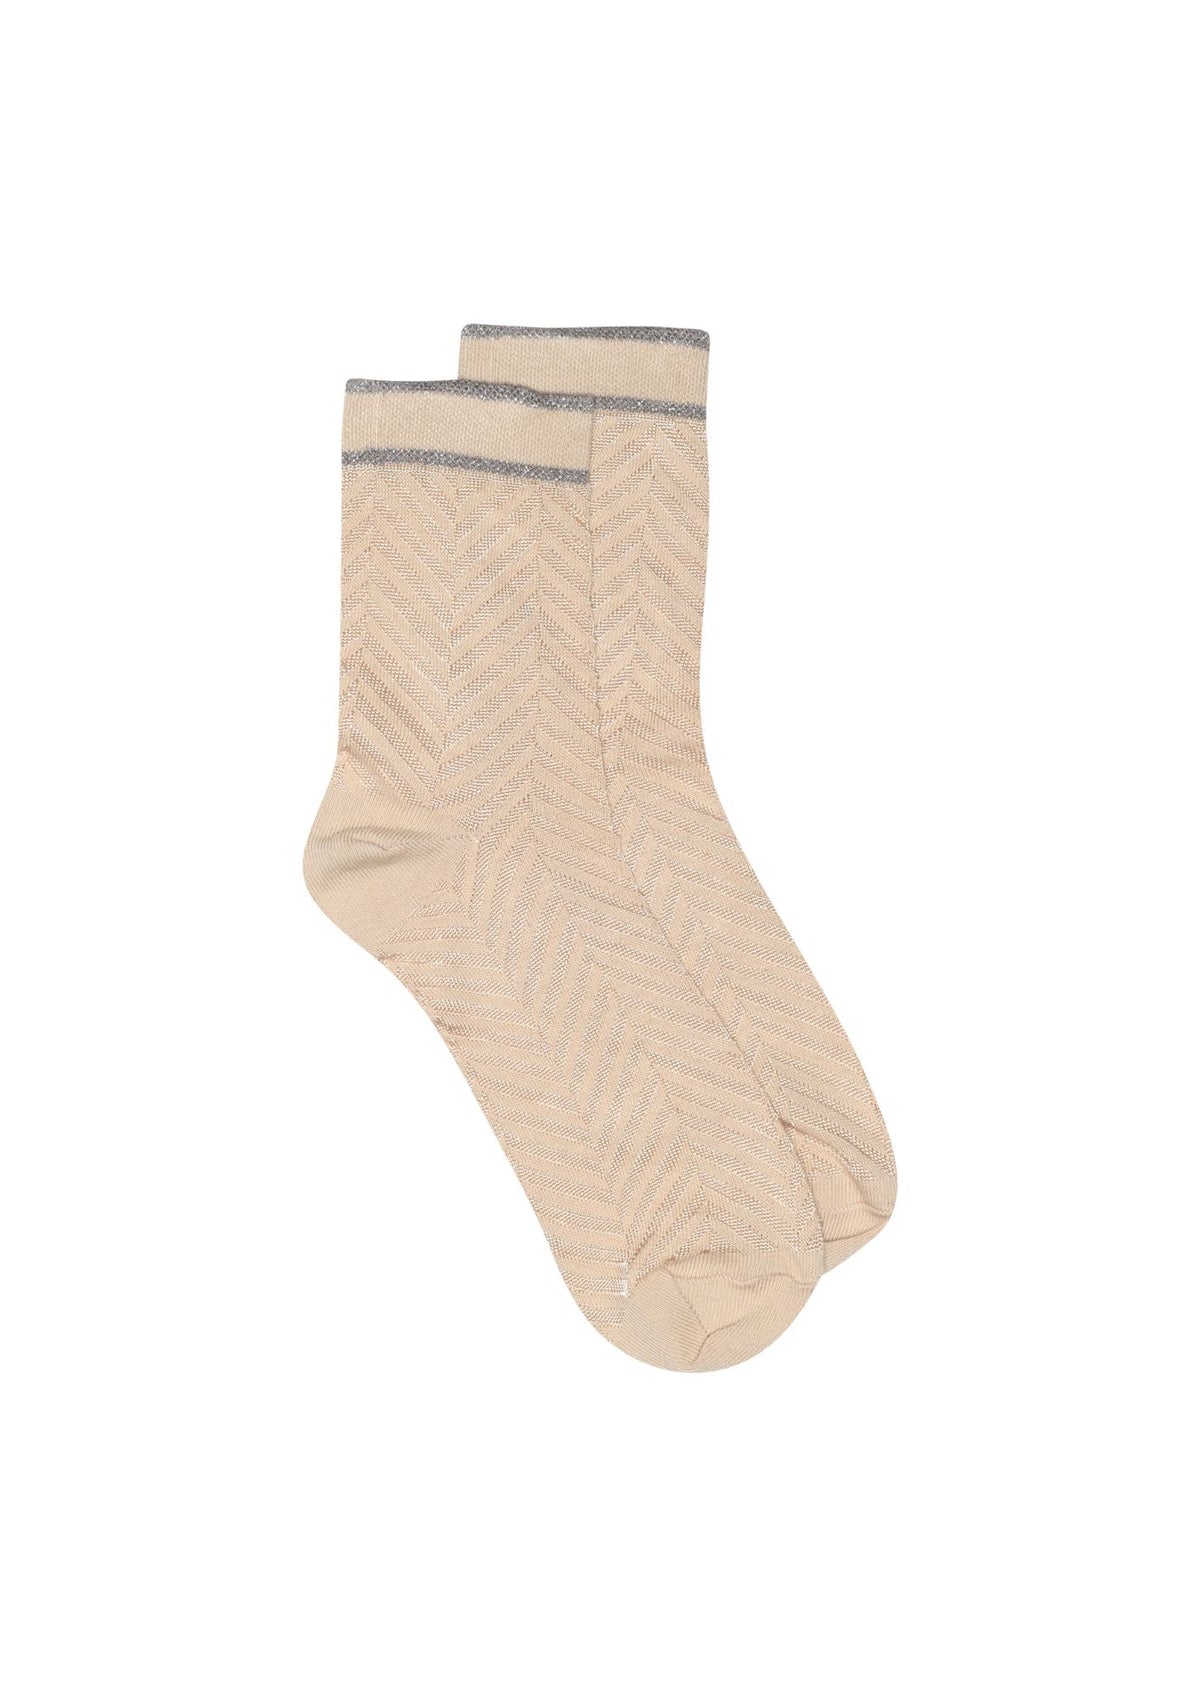 Kaila Short Sock Sand with pattern design and sparkle trim